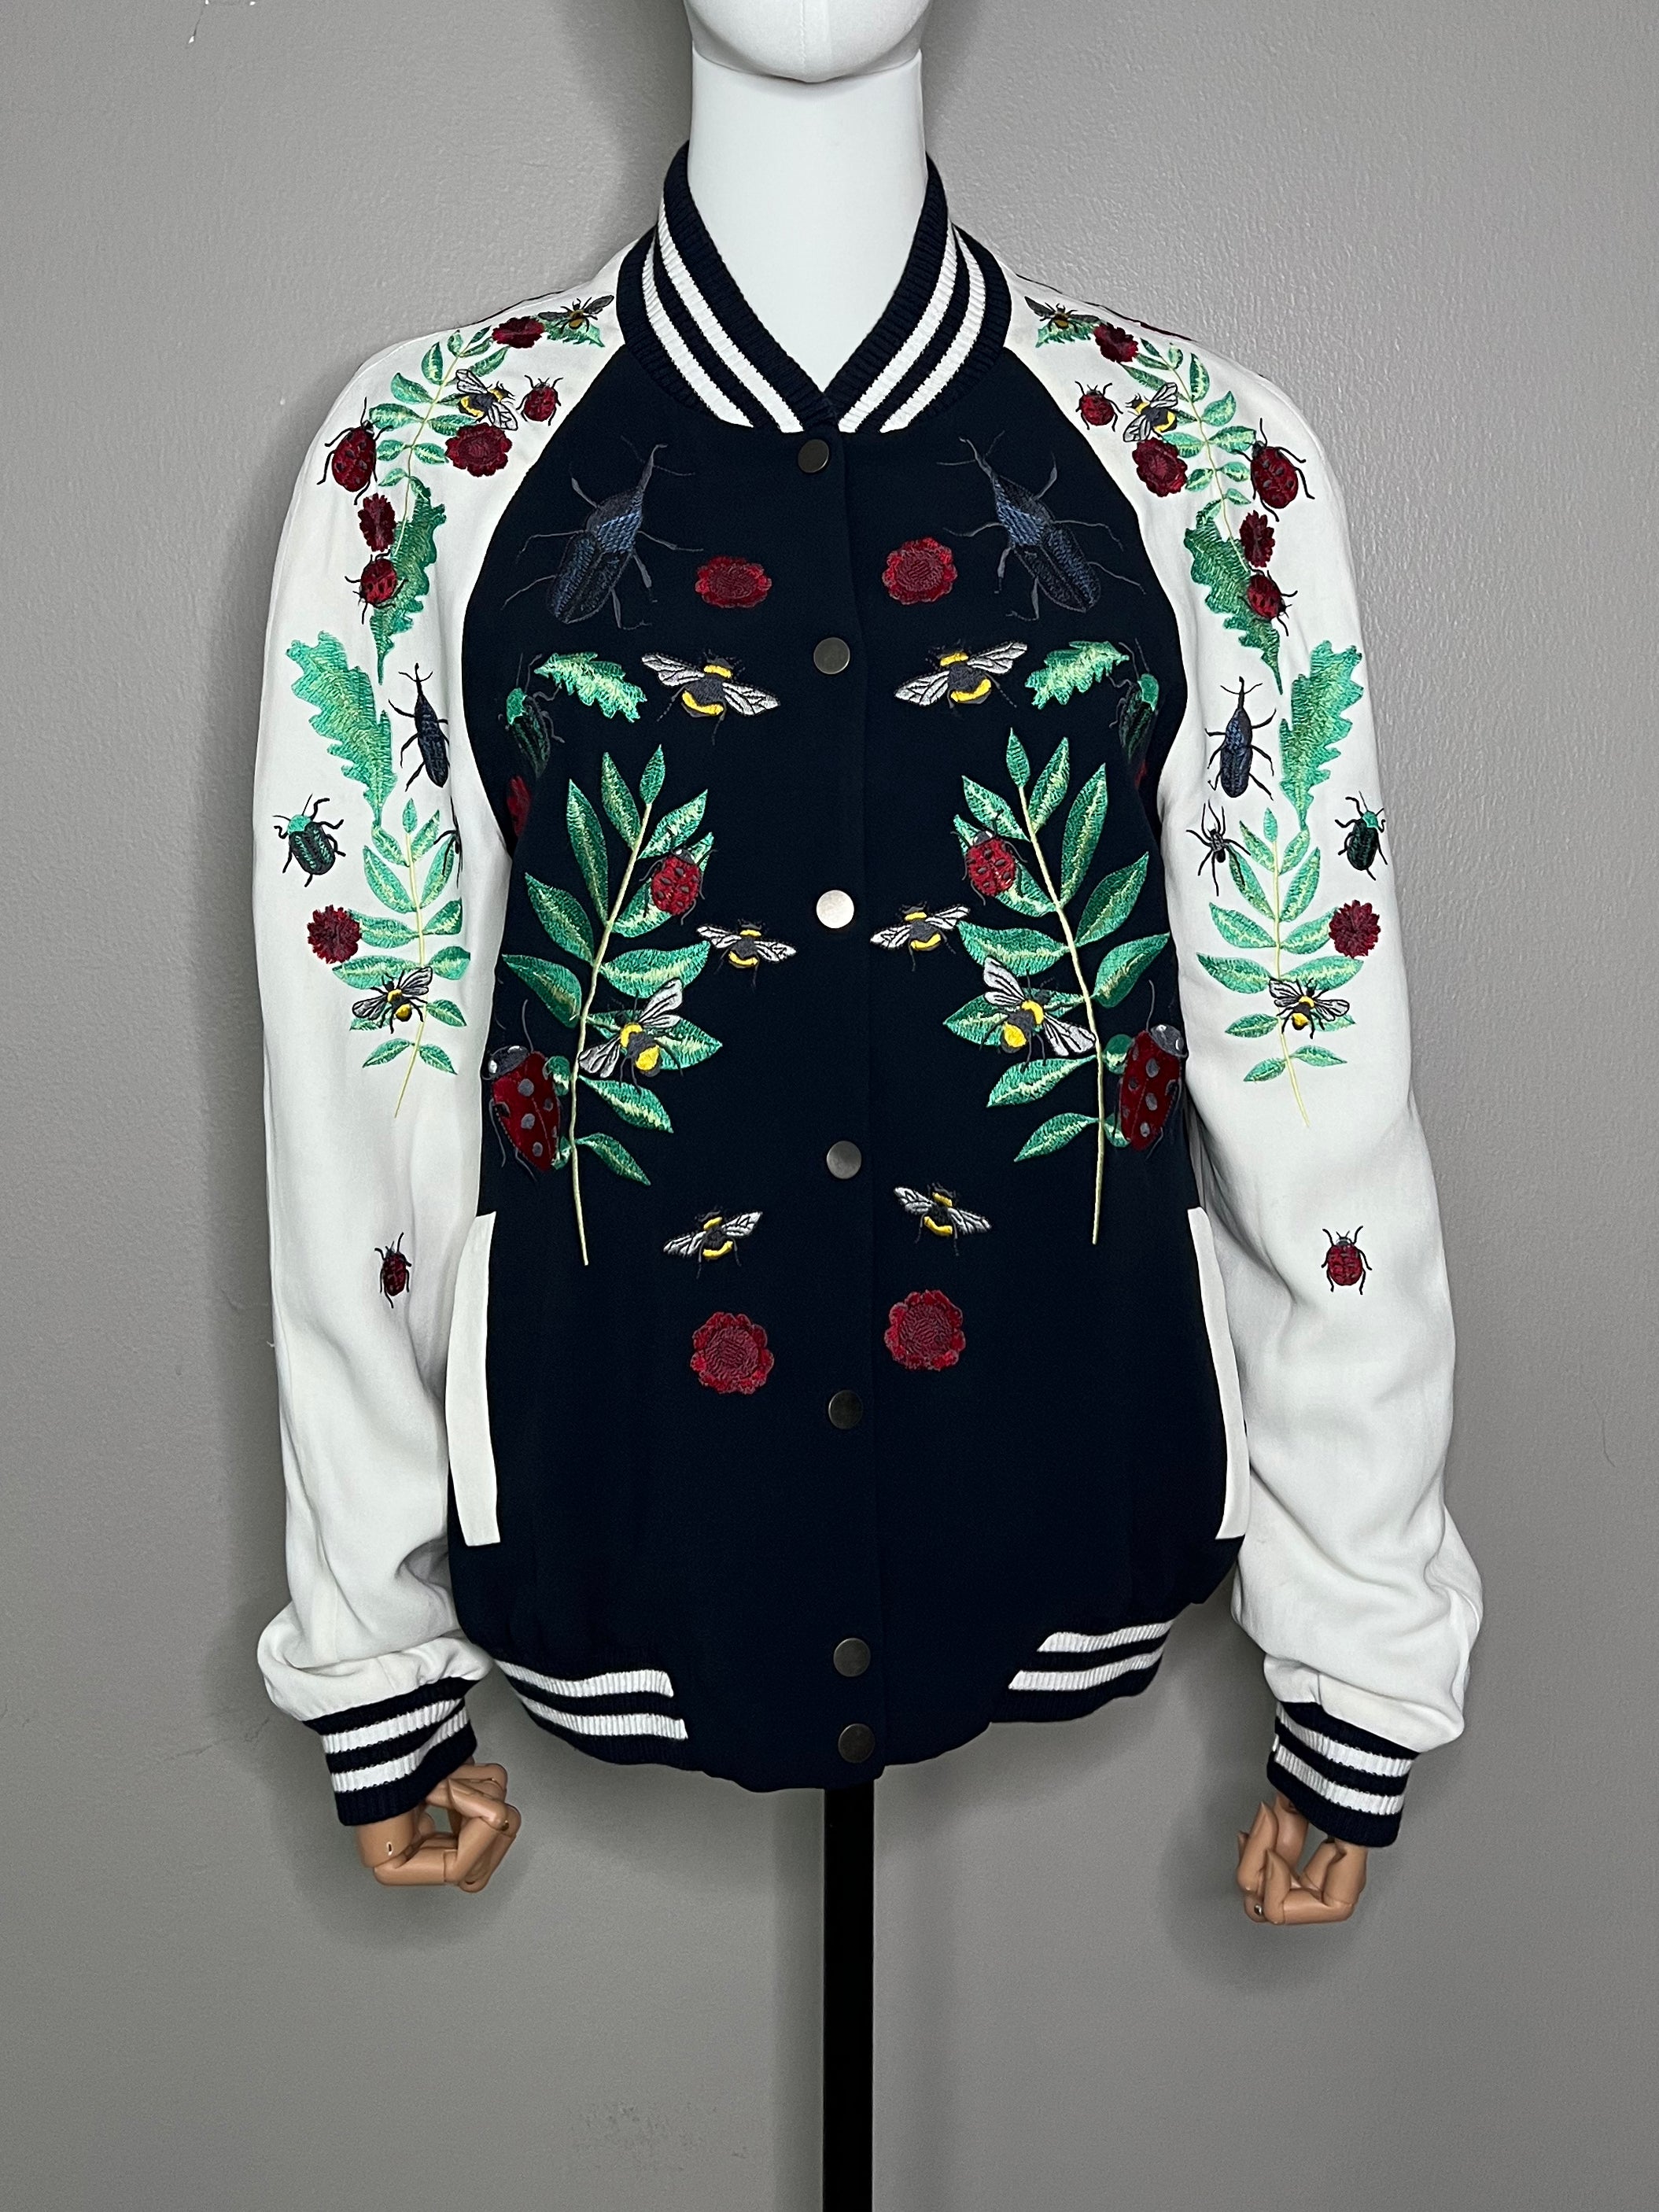 White Navy Blue Floral Jacket - Faconnable